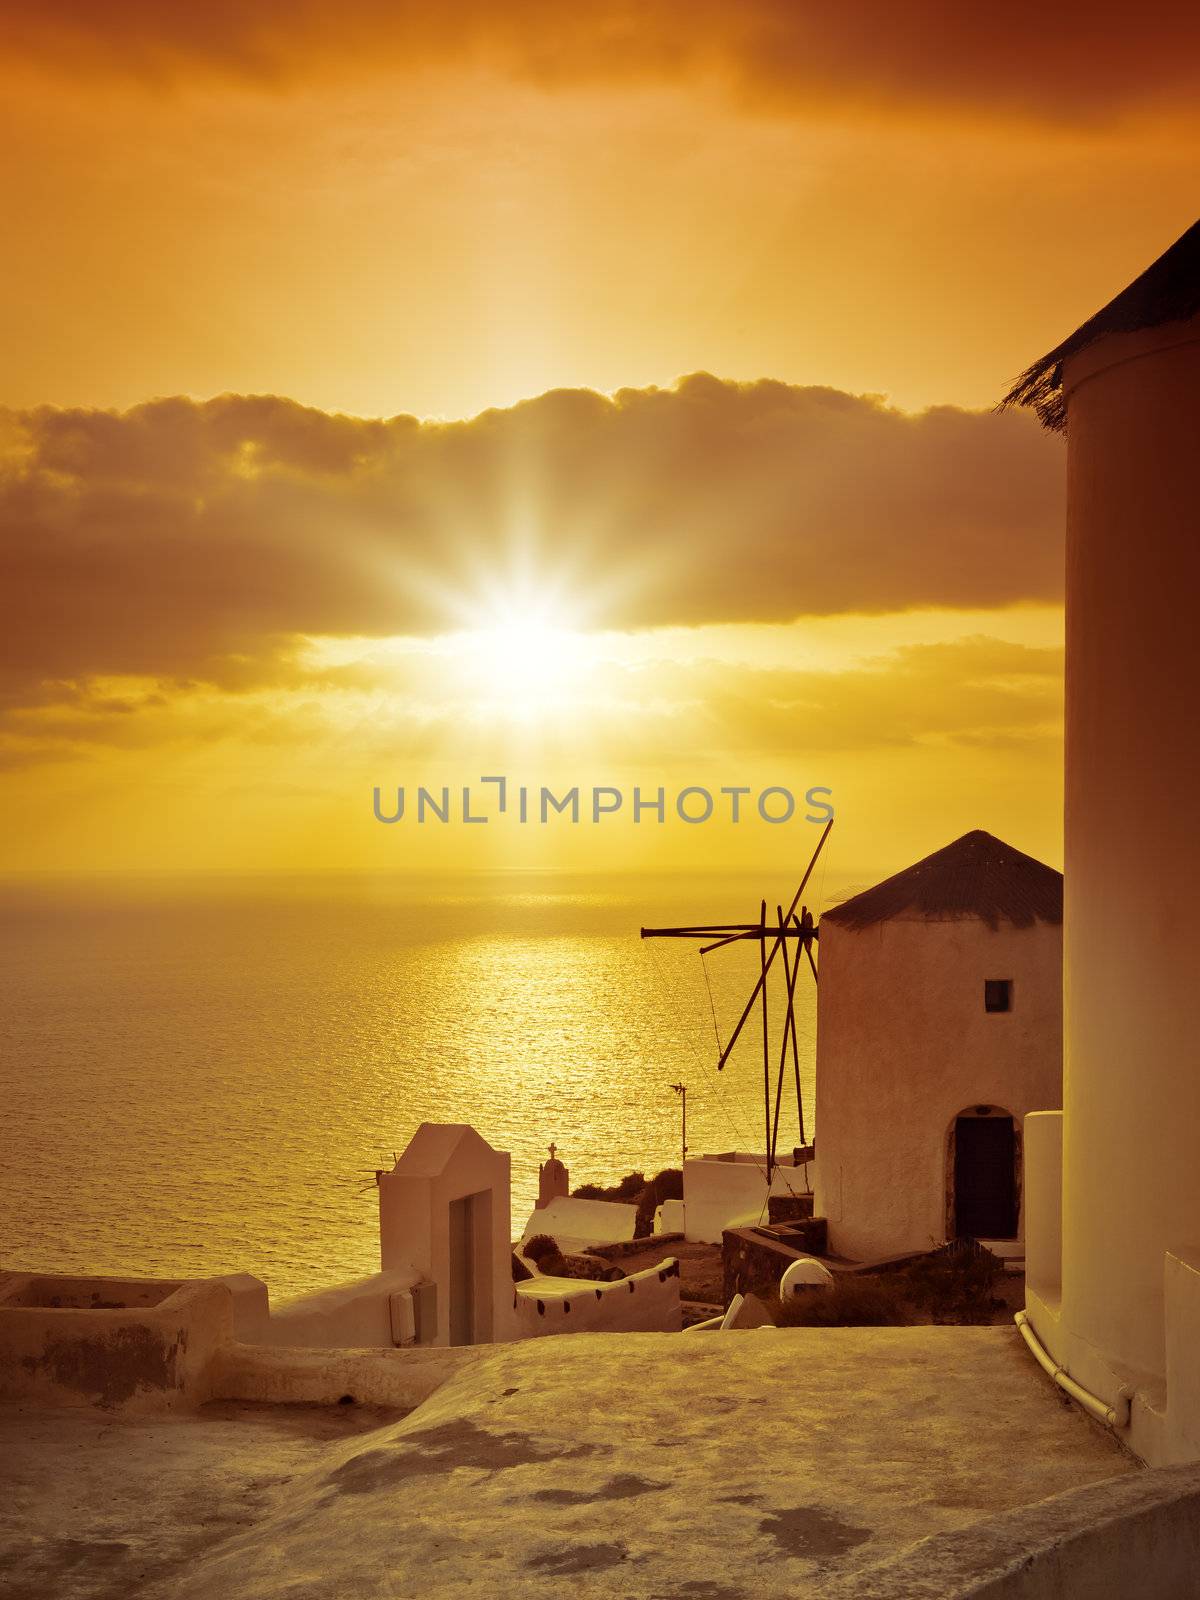 An image of the sunset at Santorini island of Greece